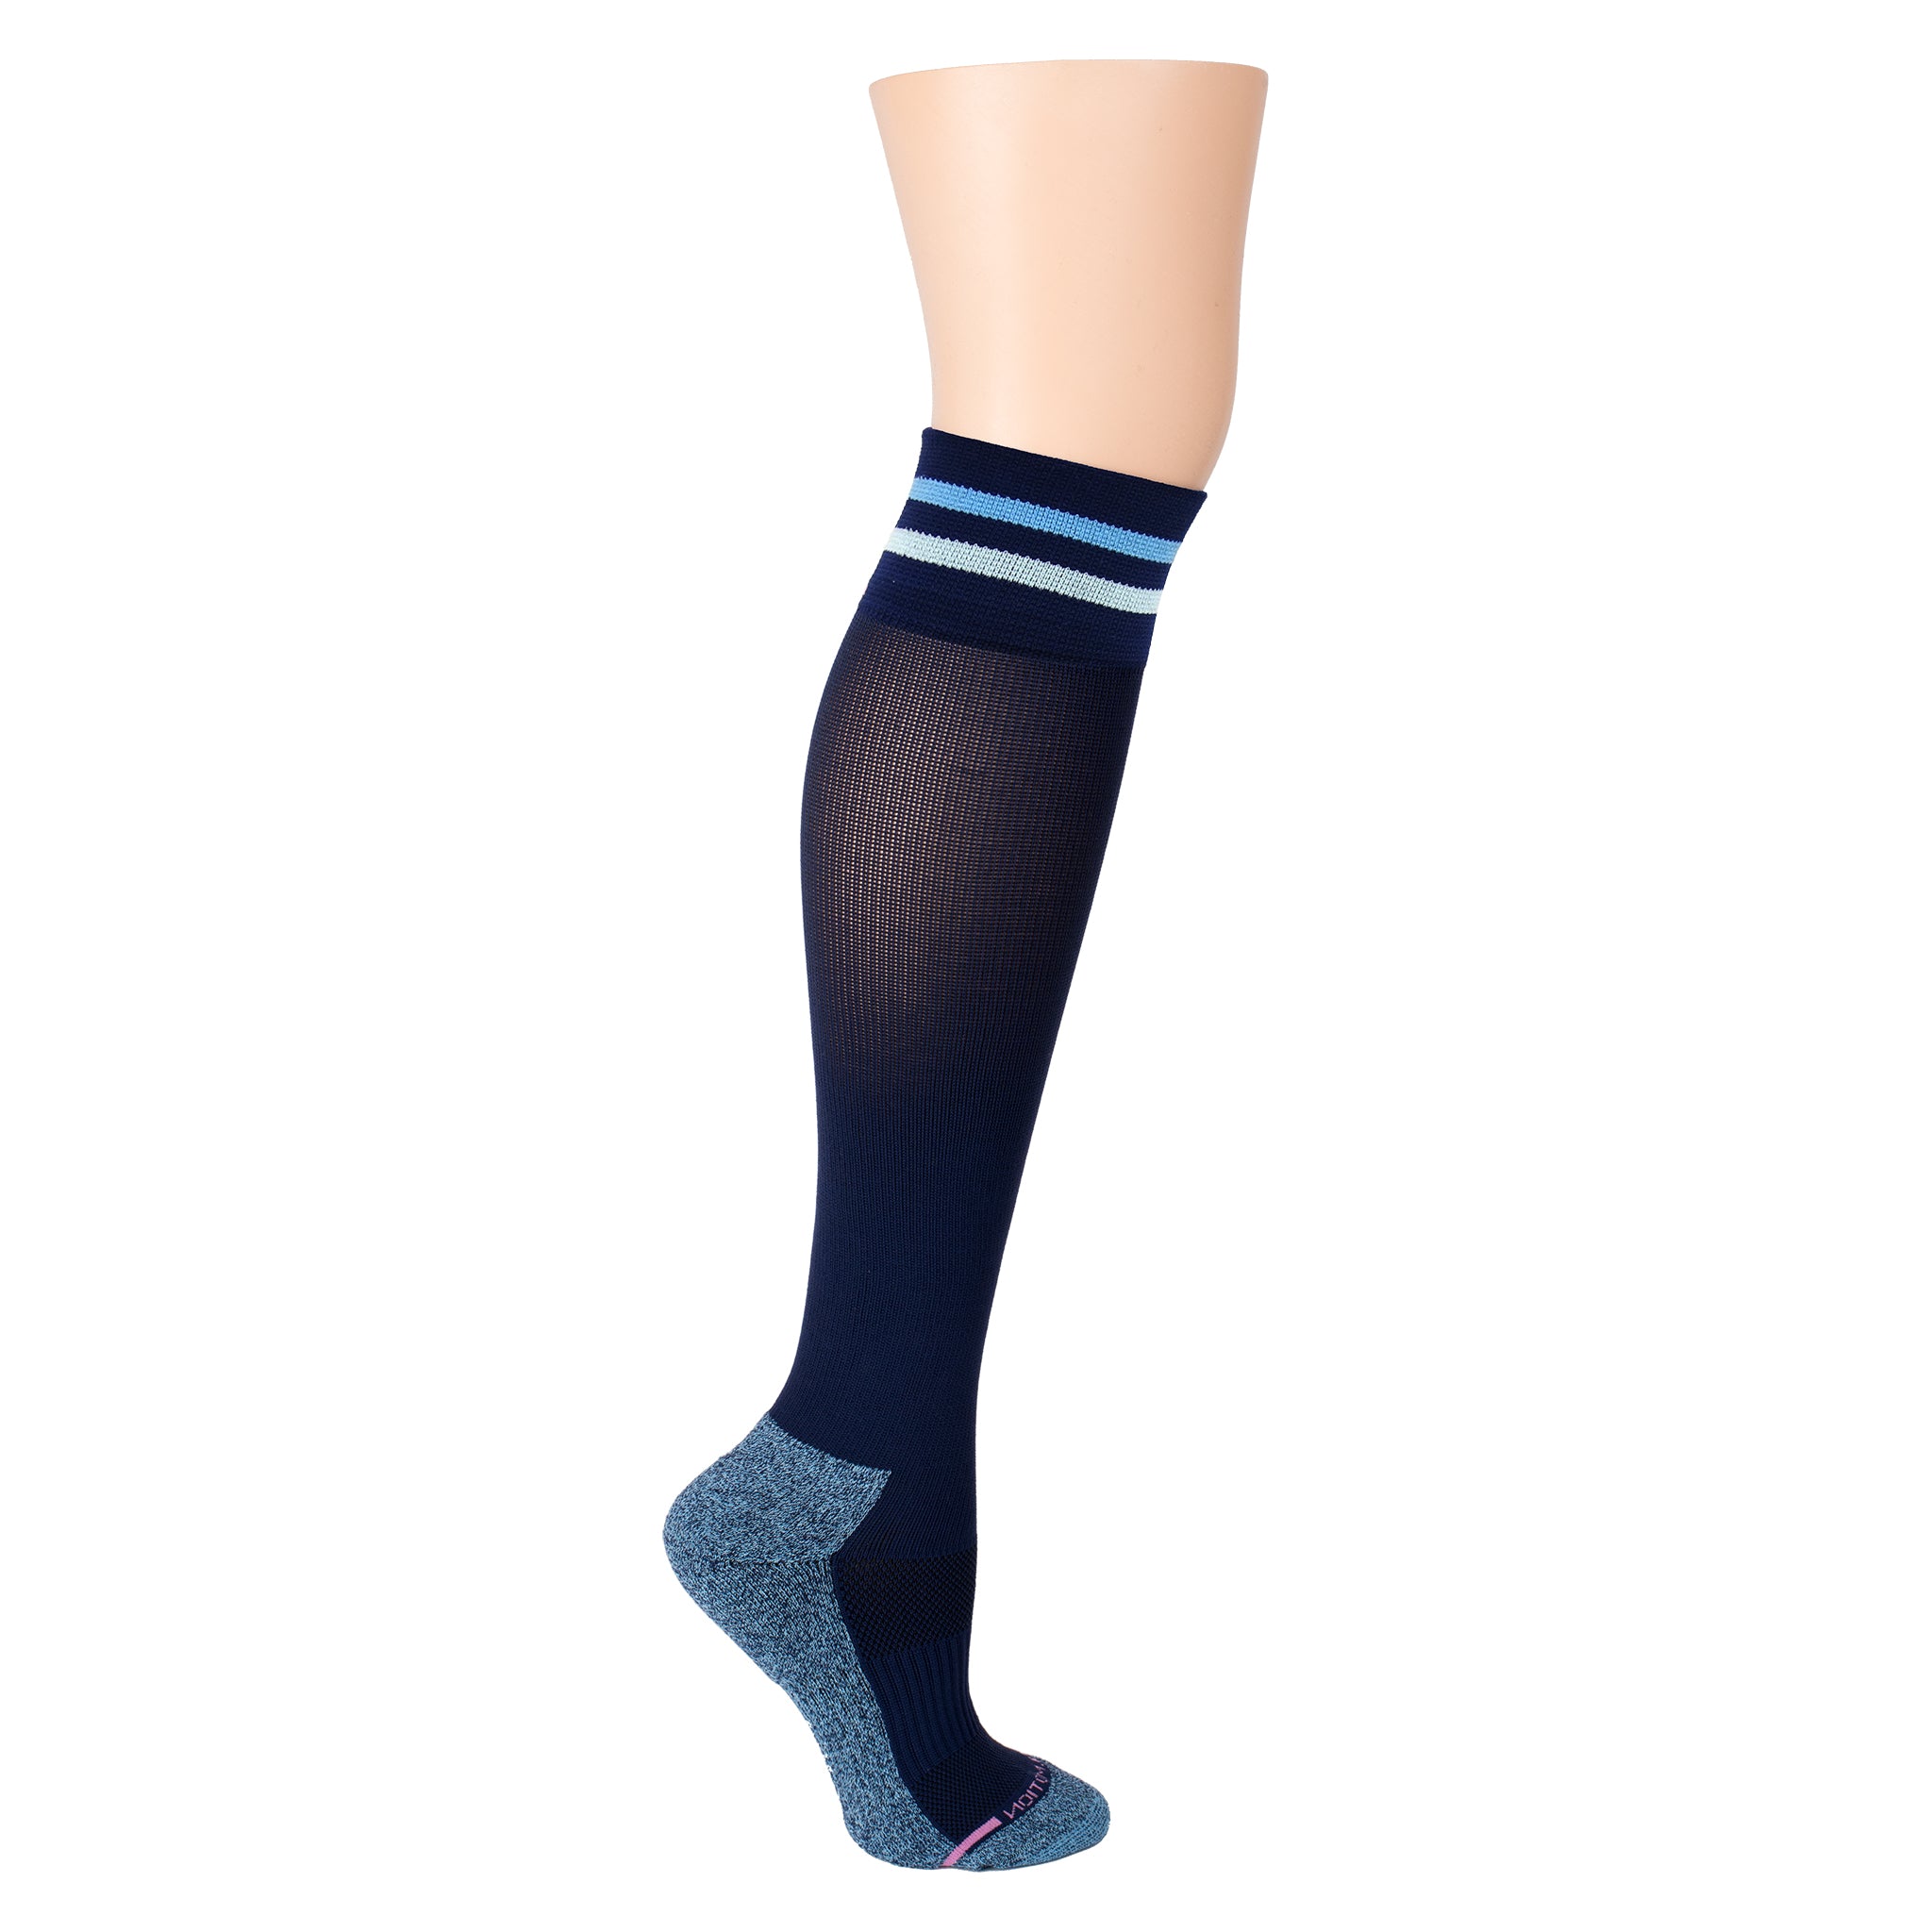 Knee-High Compression Socks with Half Cushion for Women | Dr. Motion ...